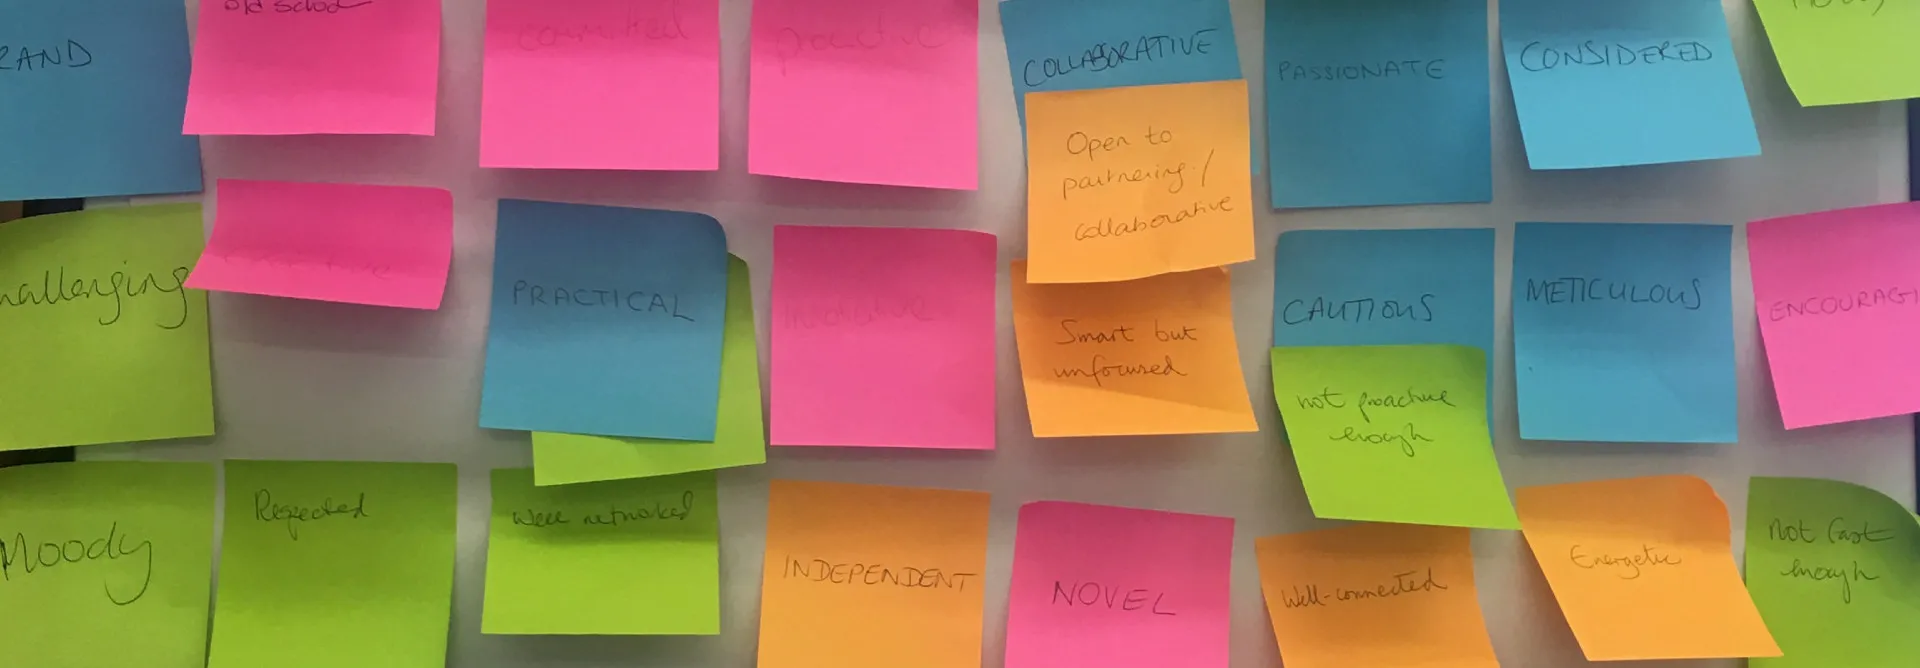 User Research - postit notes arranged on a wall